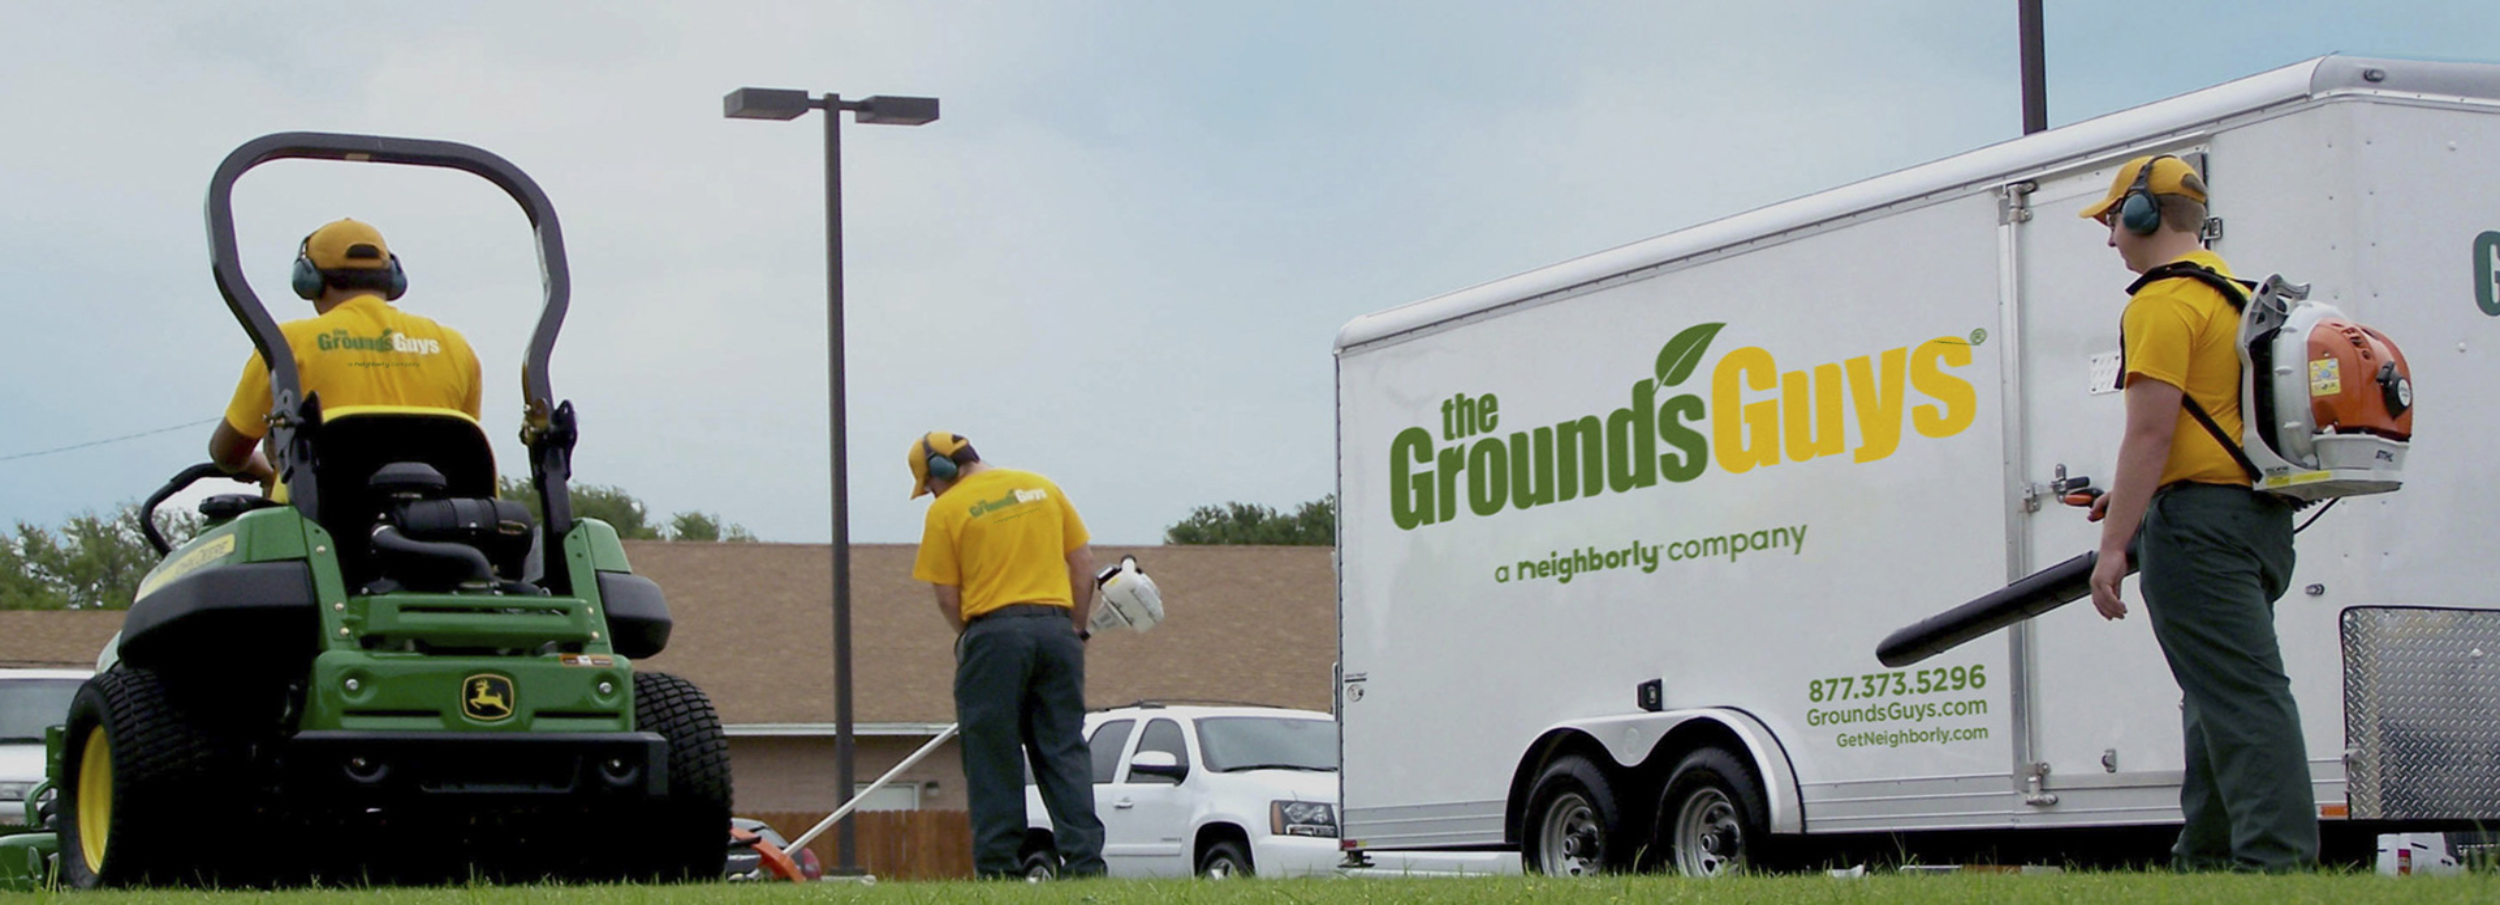 Grounds Guys crew cleaning up lawn next to company truck and trailer.